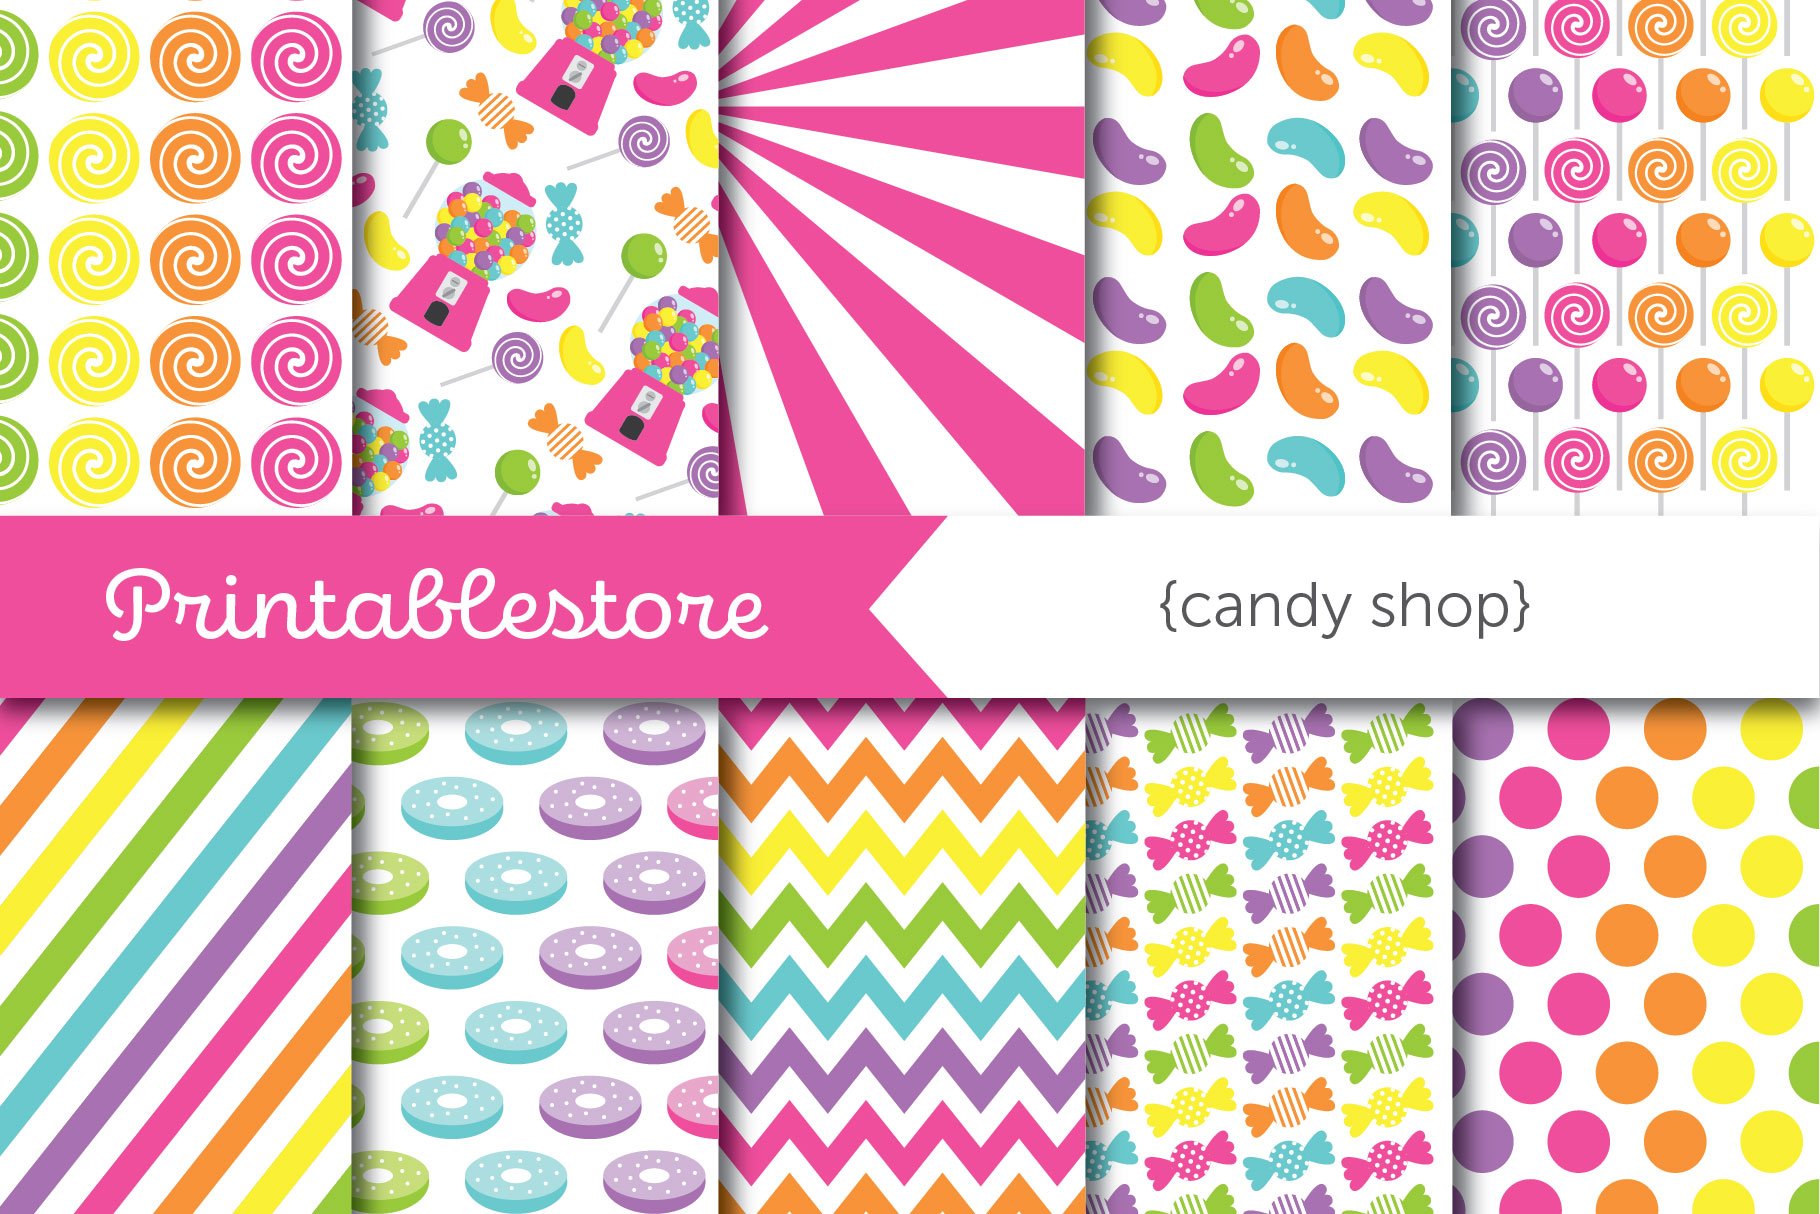 Candy Shop Paper (DP5B) cover image.